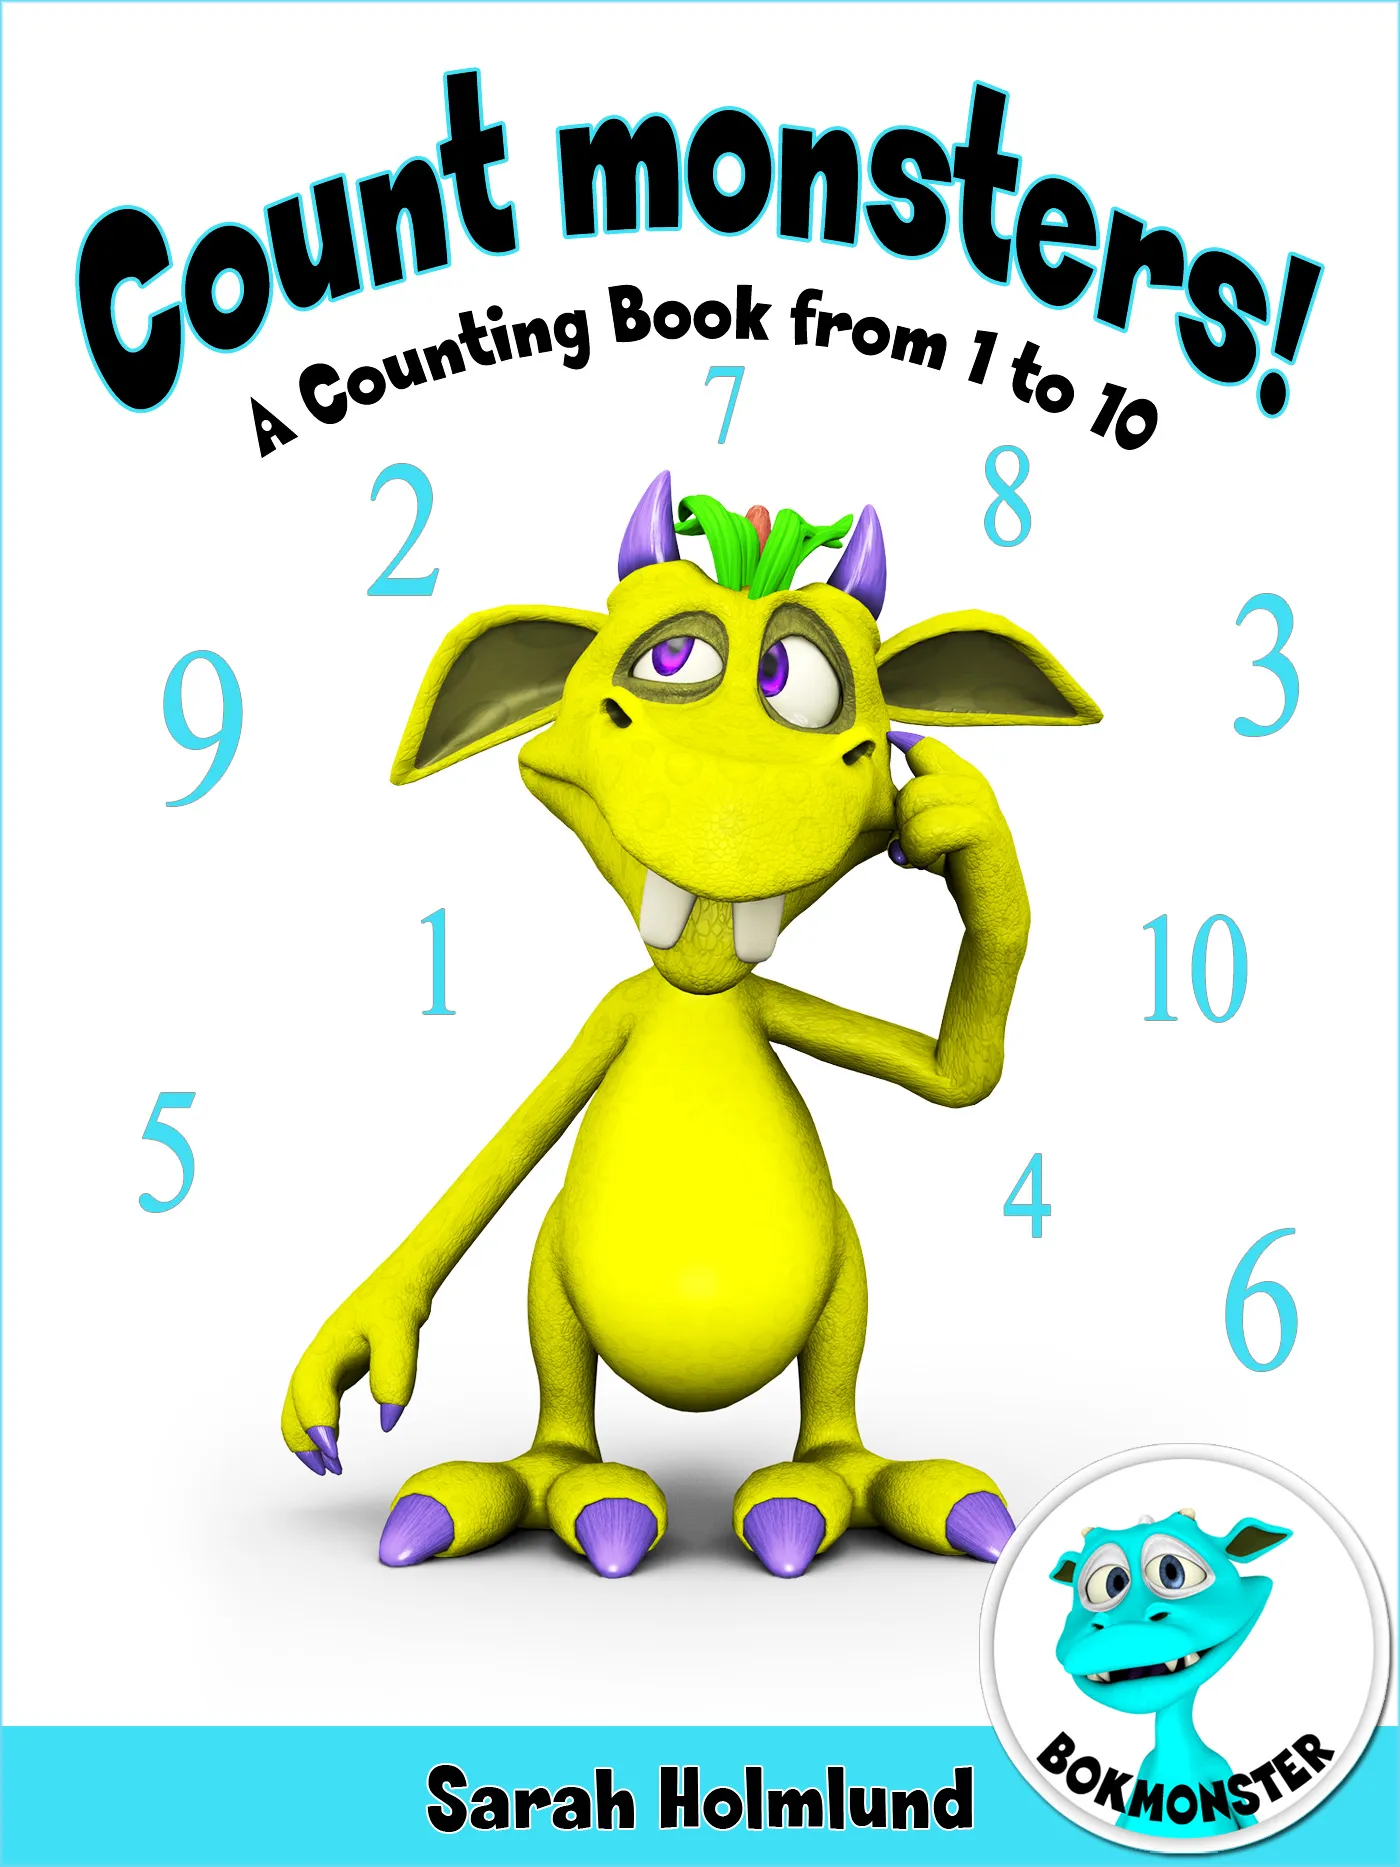 Count monsters! A Counting Book from 1 to 10, e-bog af Sarah Holmlund